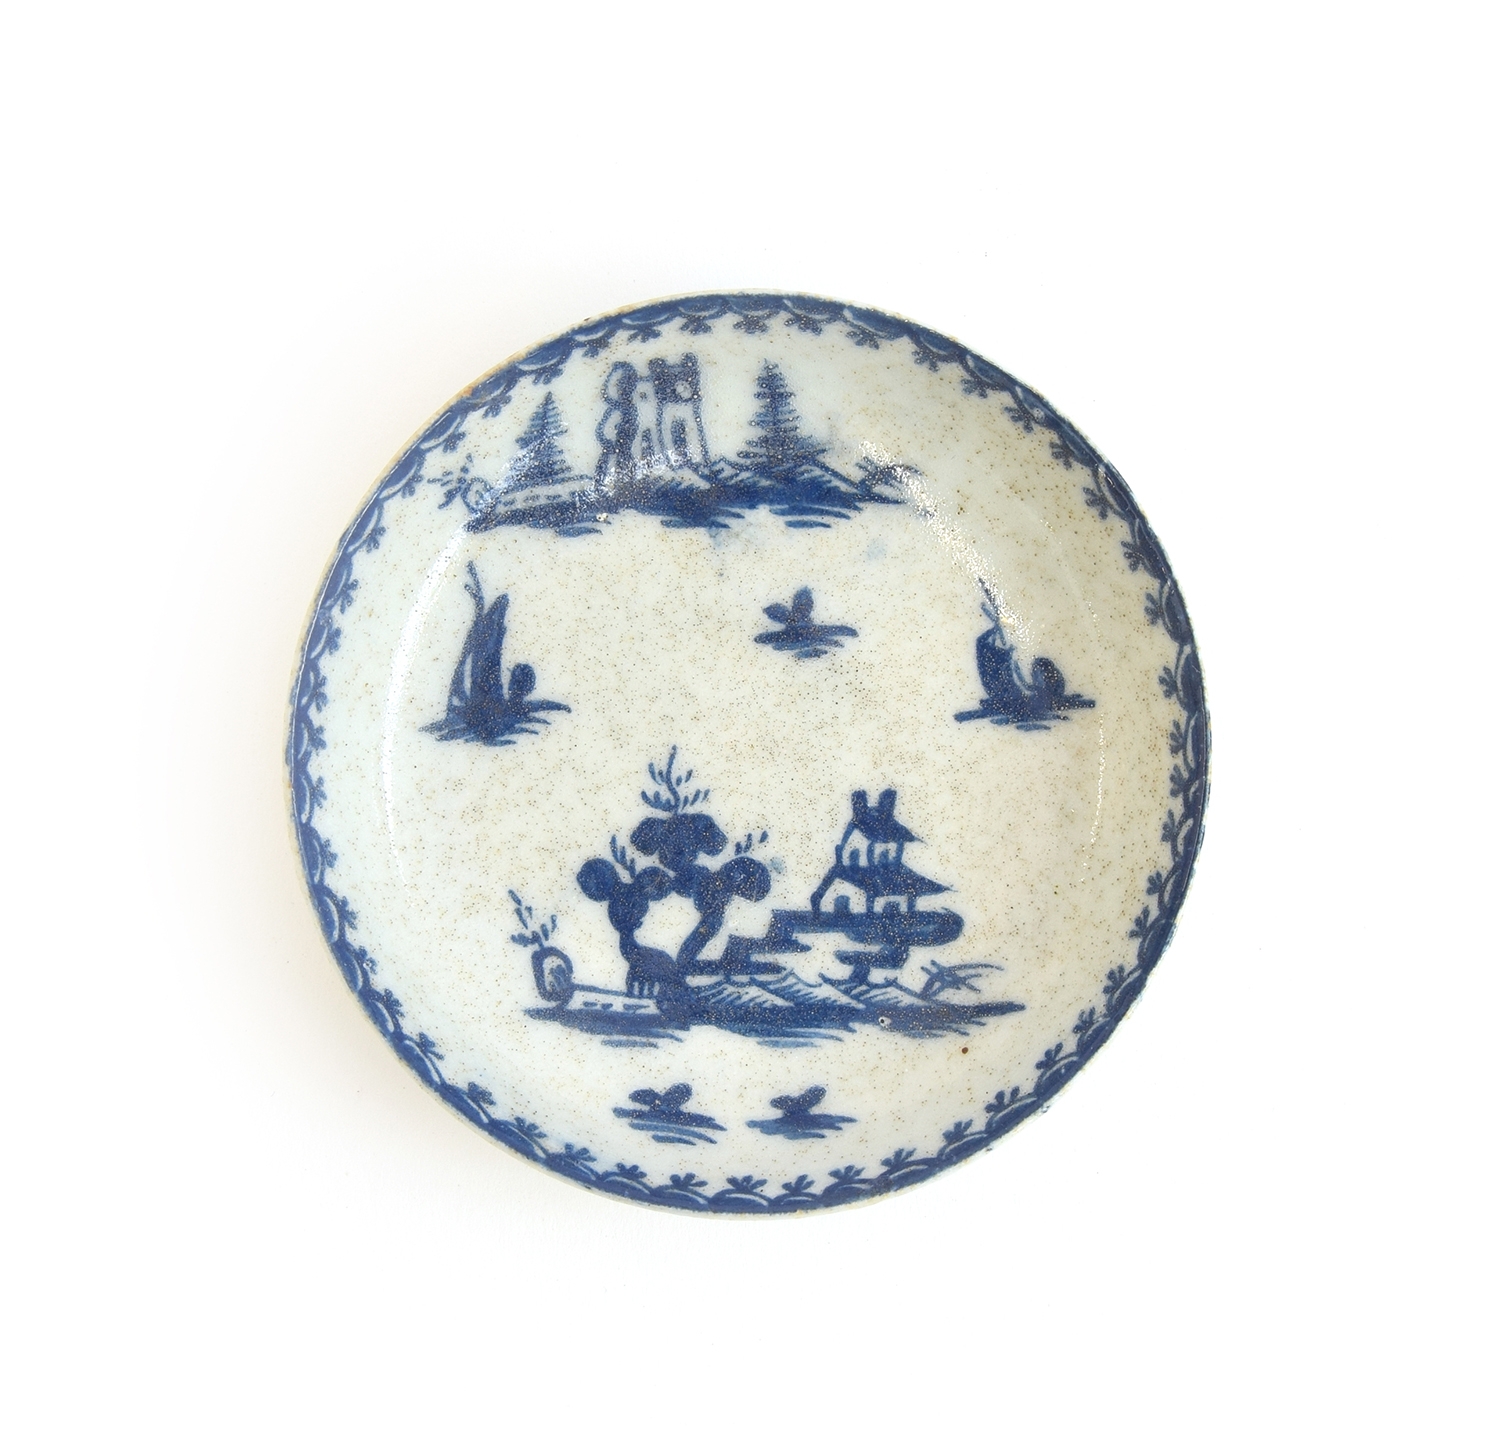 A scarce 18th century Lowestoft toy or miniature saucer c.1765, painted with a Pagoda scene within a